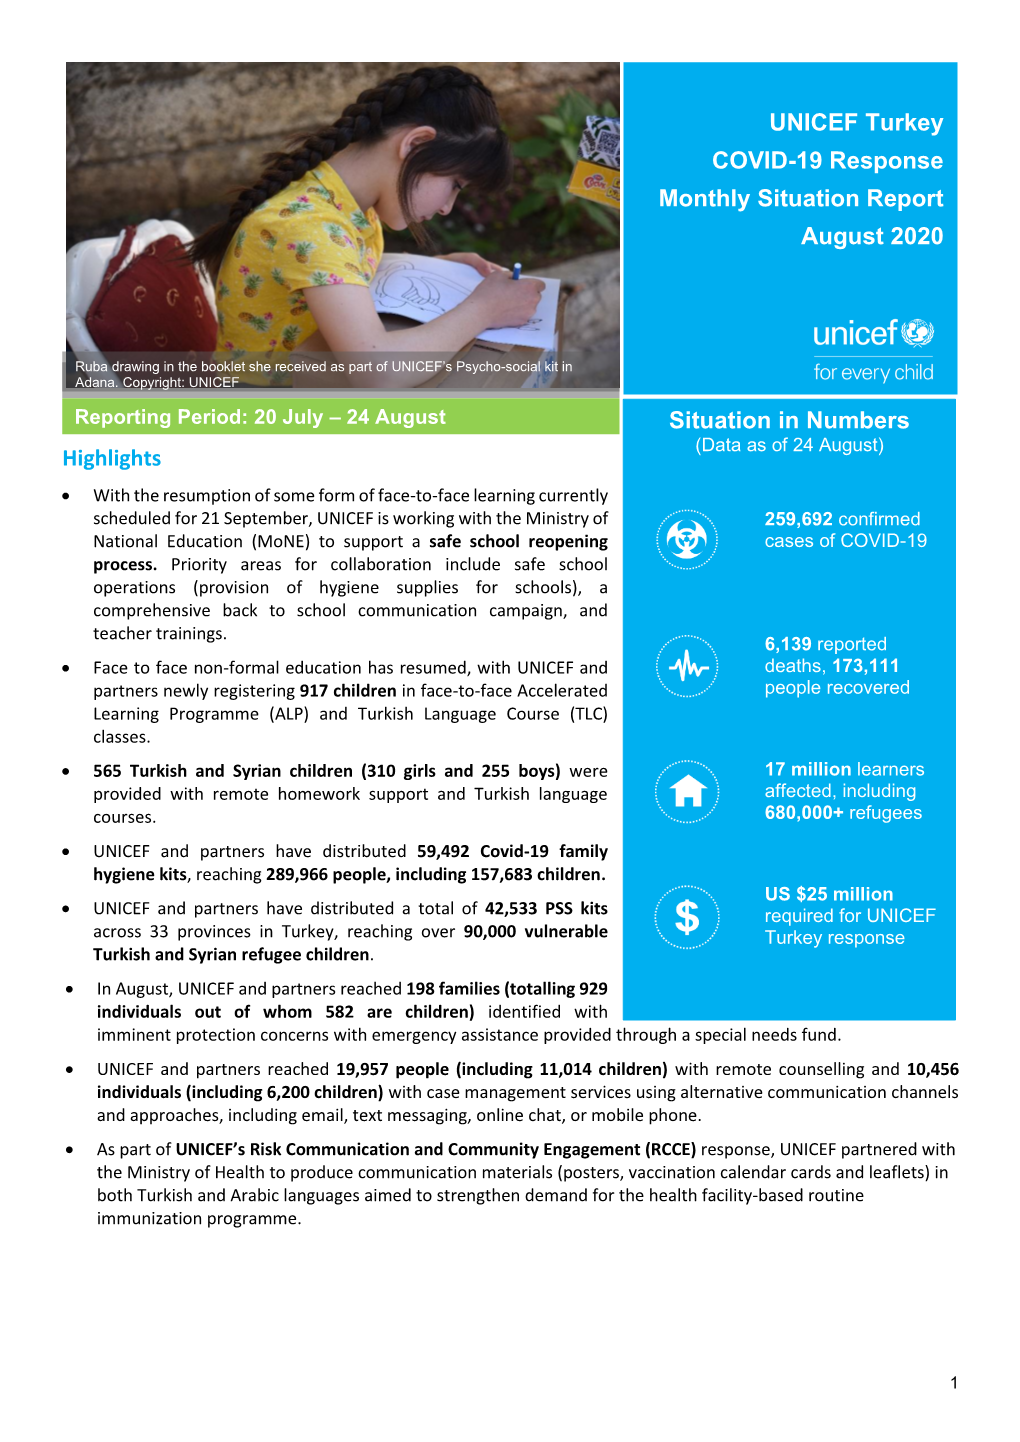 UNICEF Turkey COVID-19 Response Monthly Situation Report August 2020